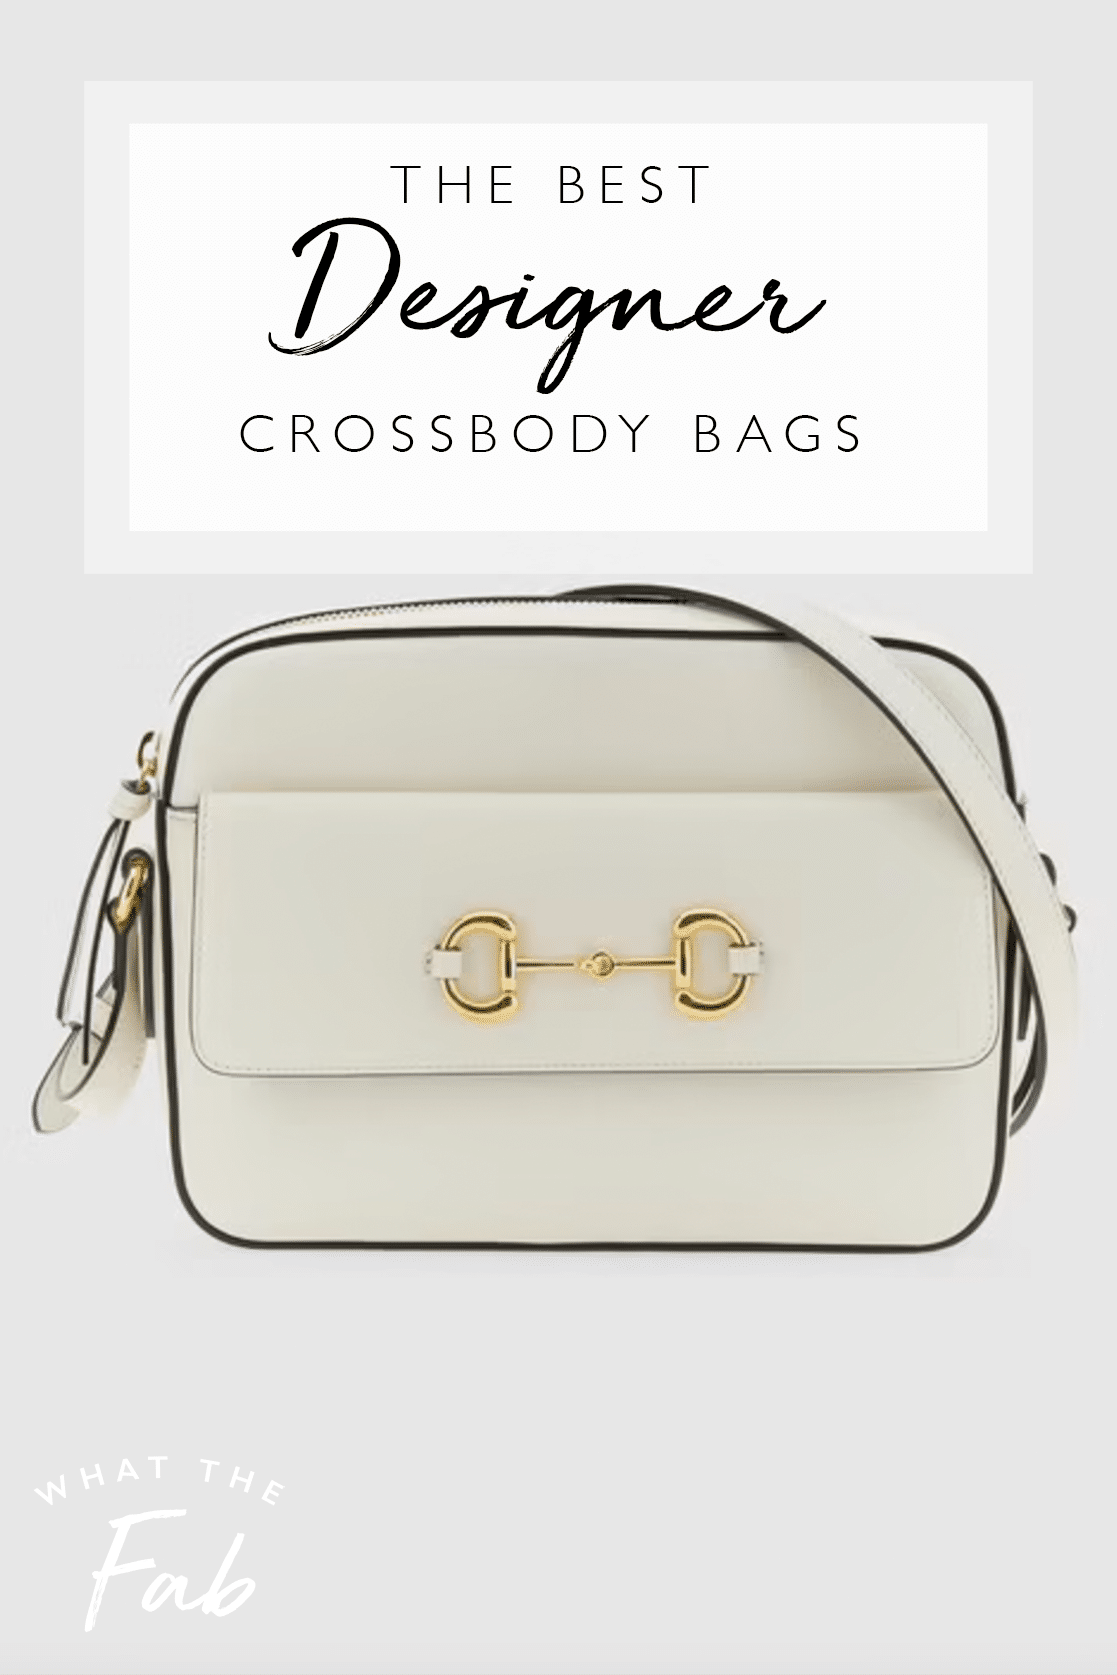 Best Designer Crossbody Bags, by Blogger What The Fab